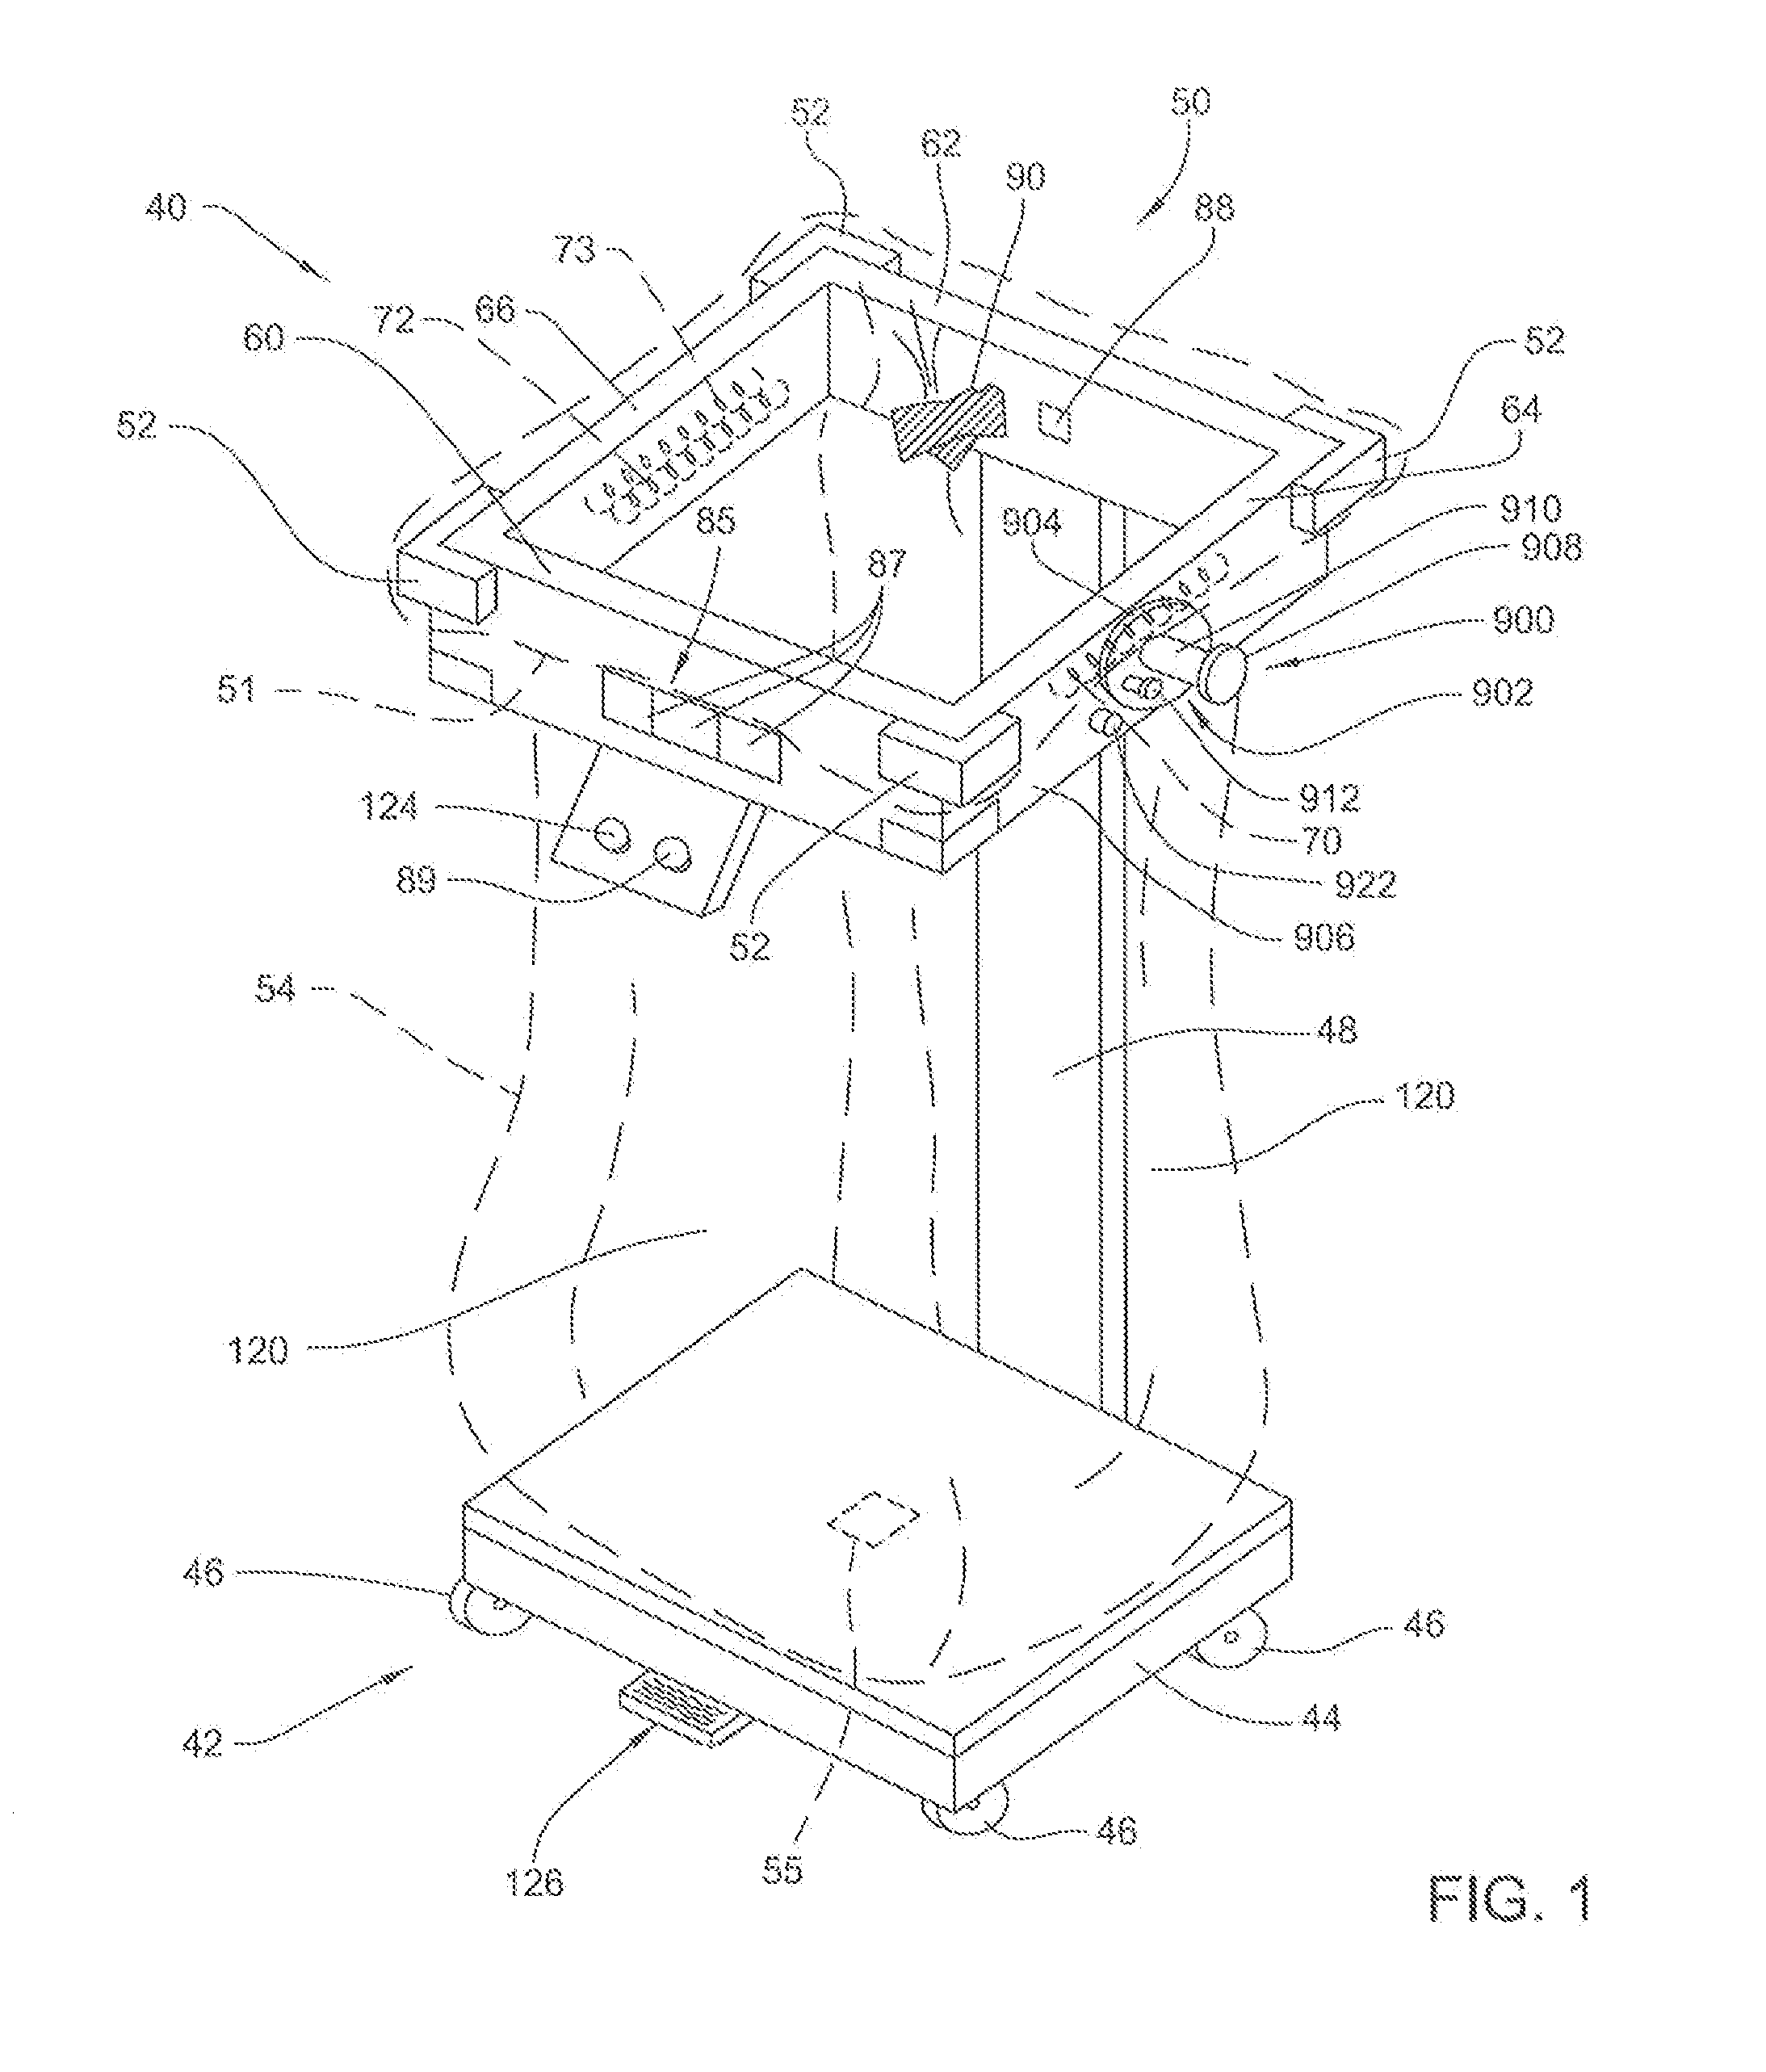 Waste collection system for collecting solid medical waste including metal detection, pre-detection apparatus, and/or bag- tensioning mechanism